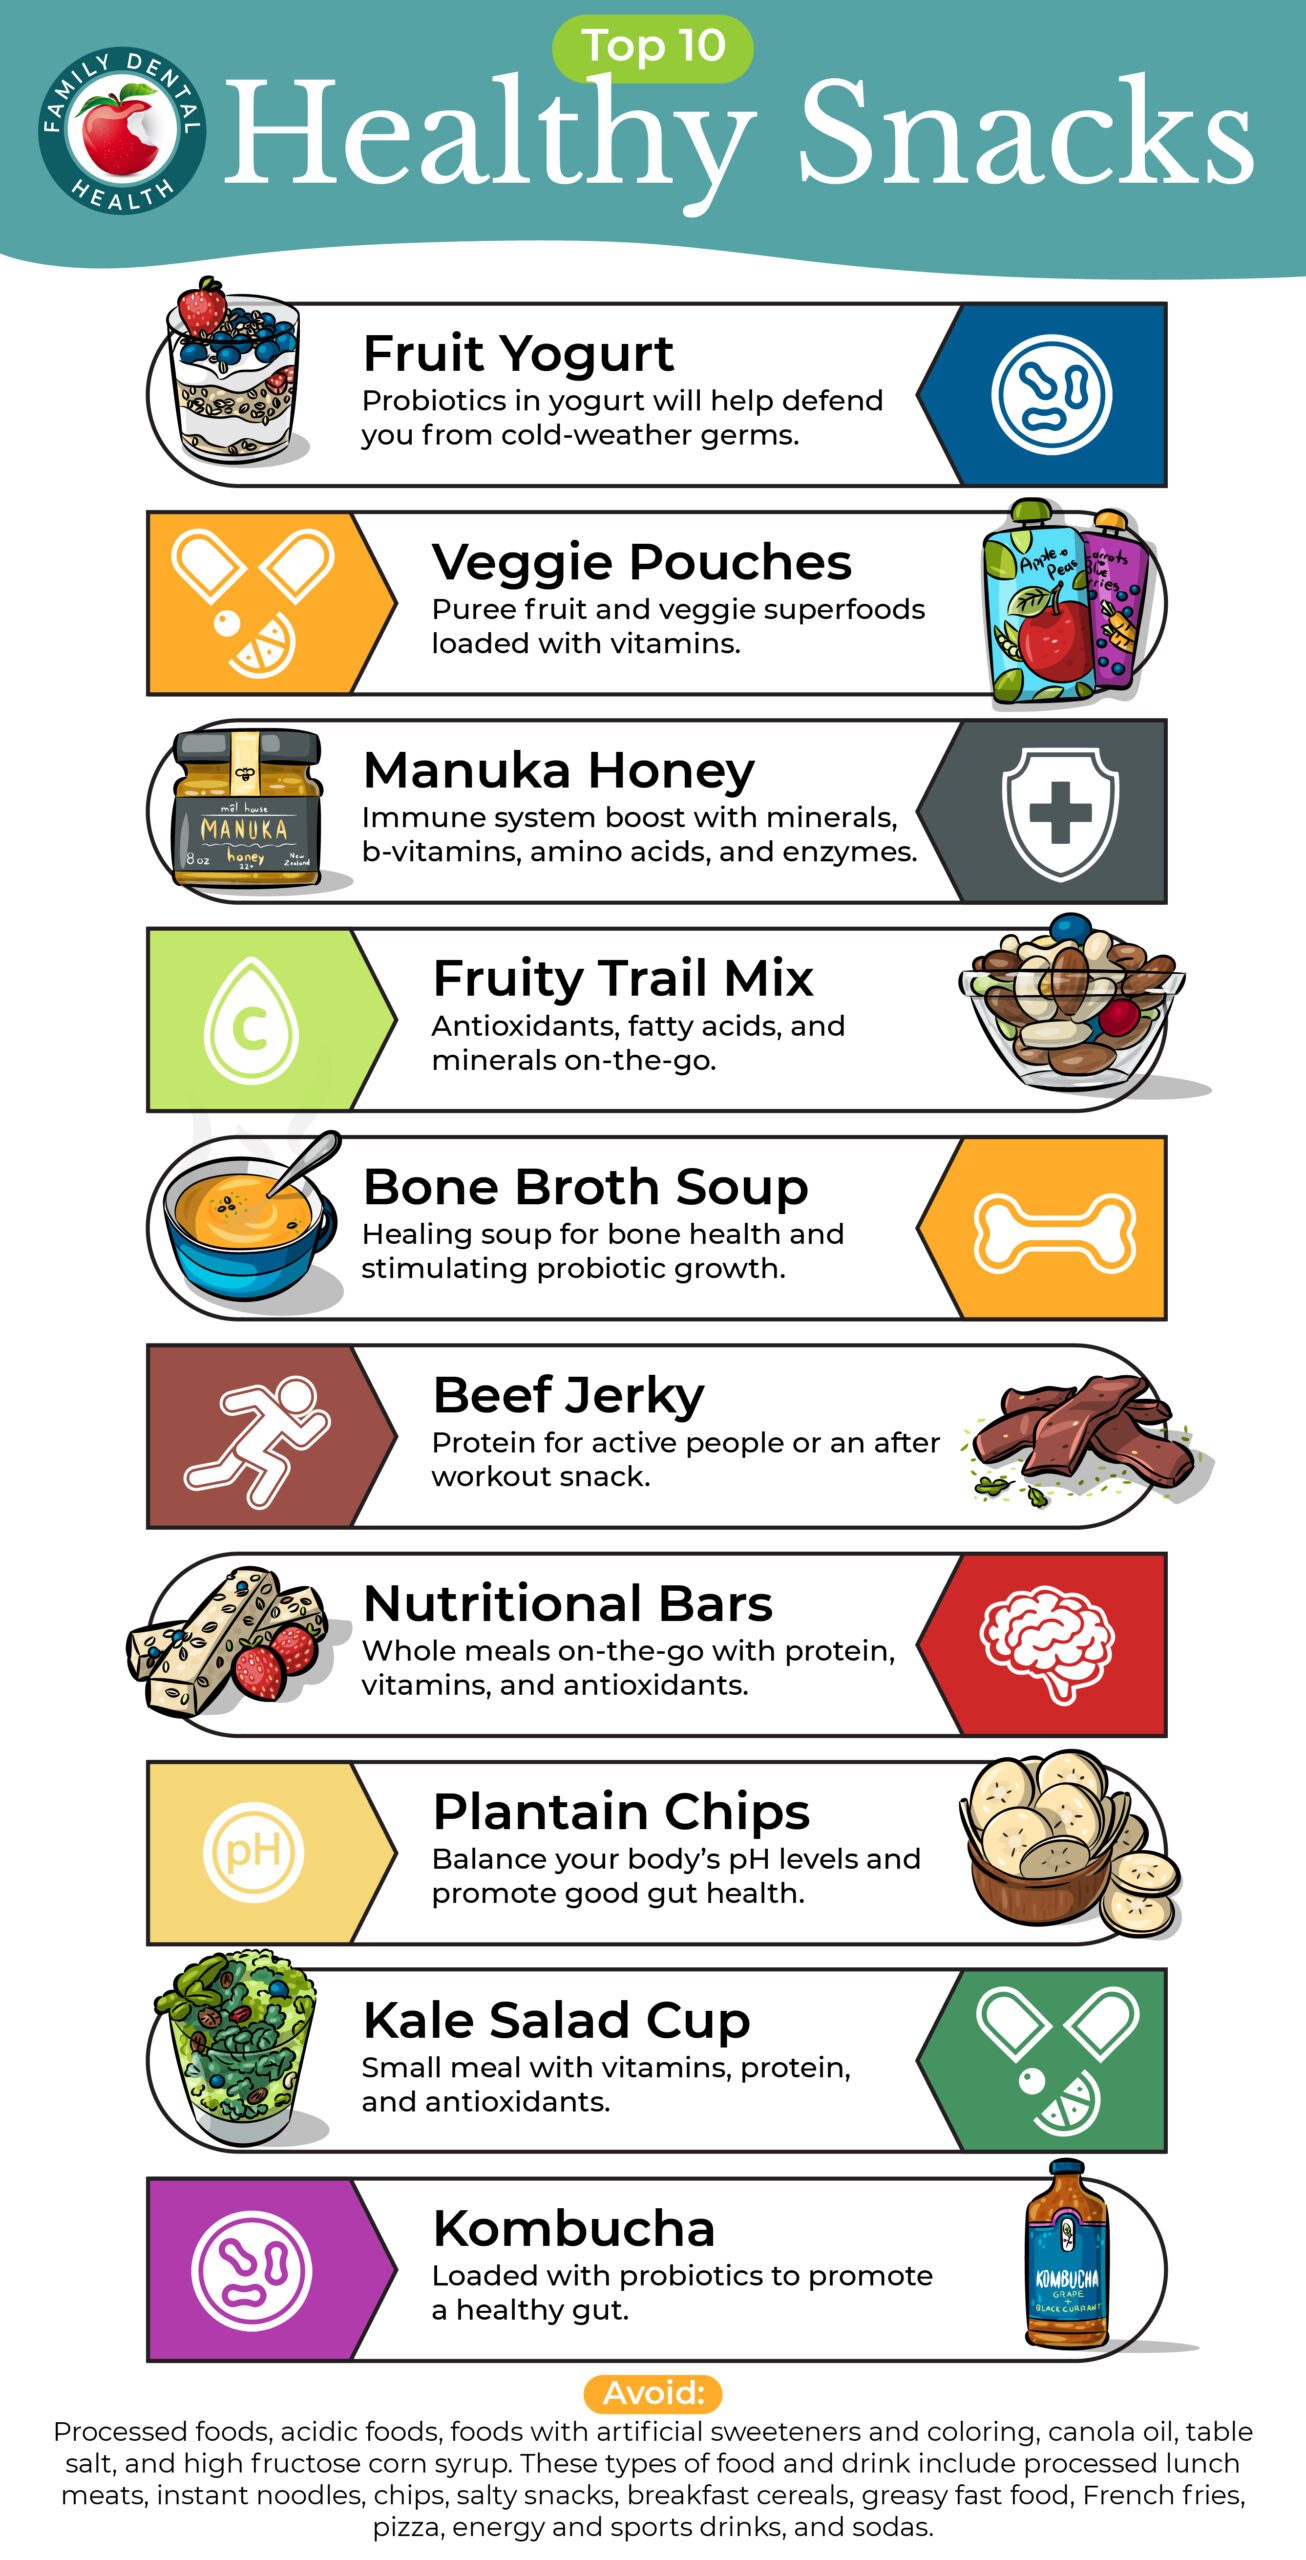 Top 10 Healthy Snacks Over the Holidays + What to Avoid - top 10 snacks infographic 01 scaled